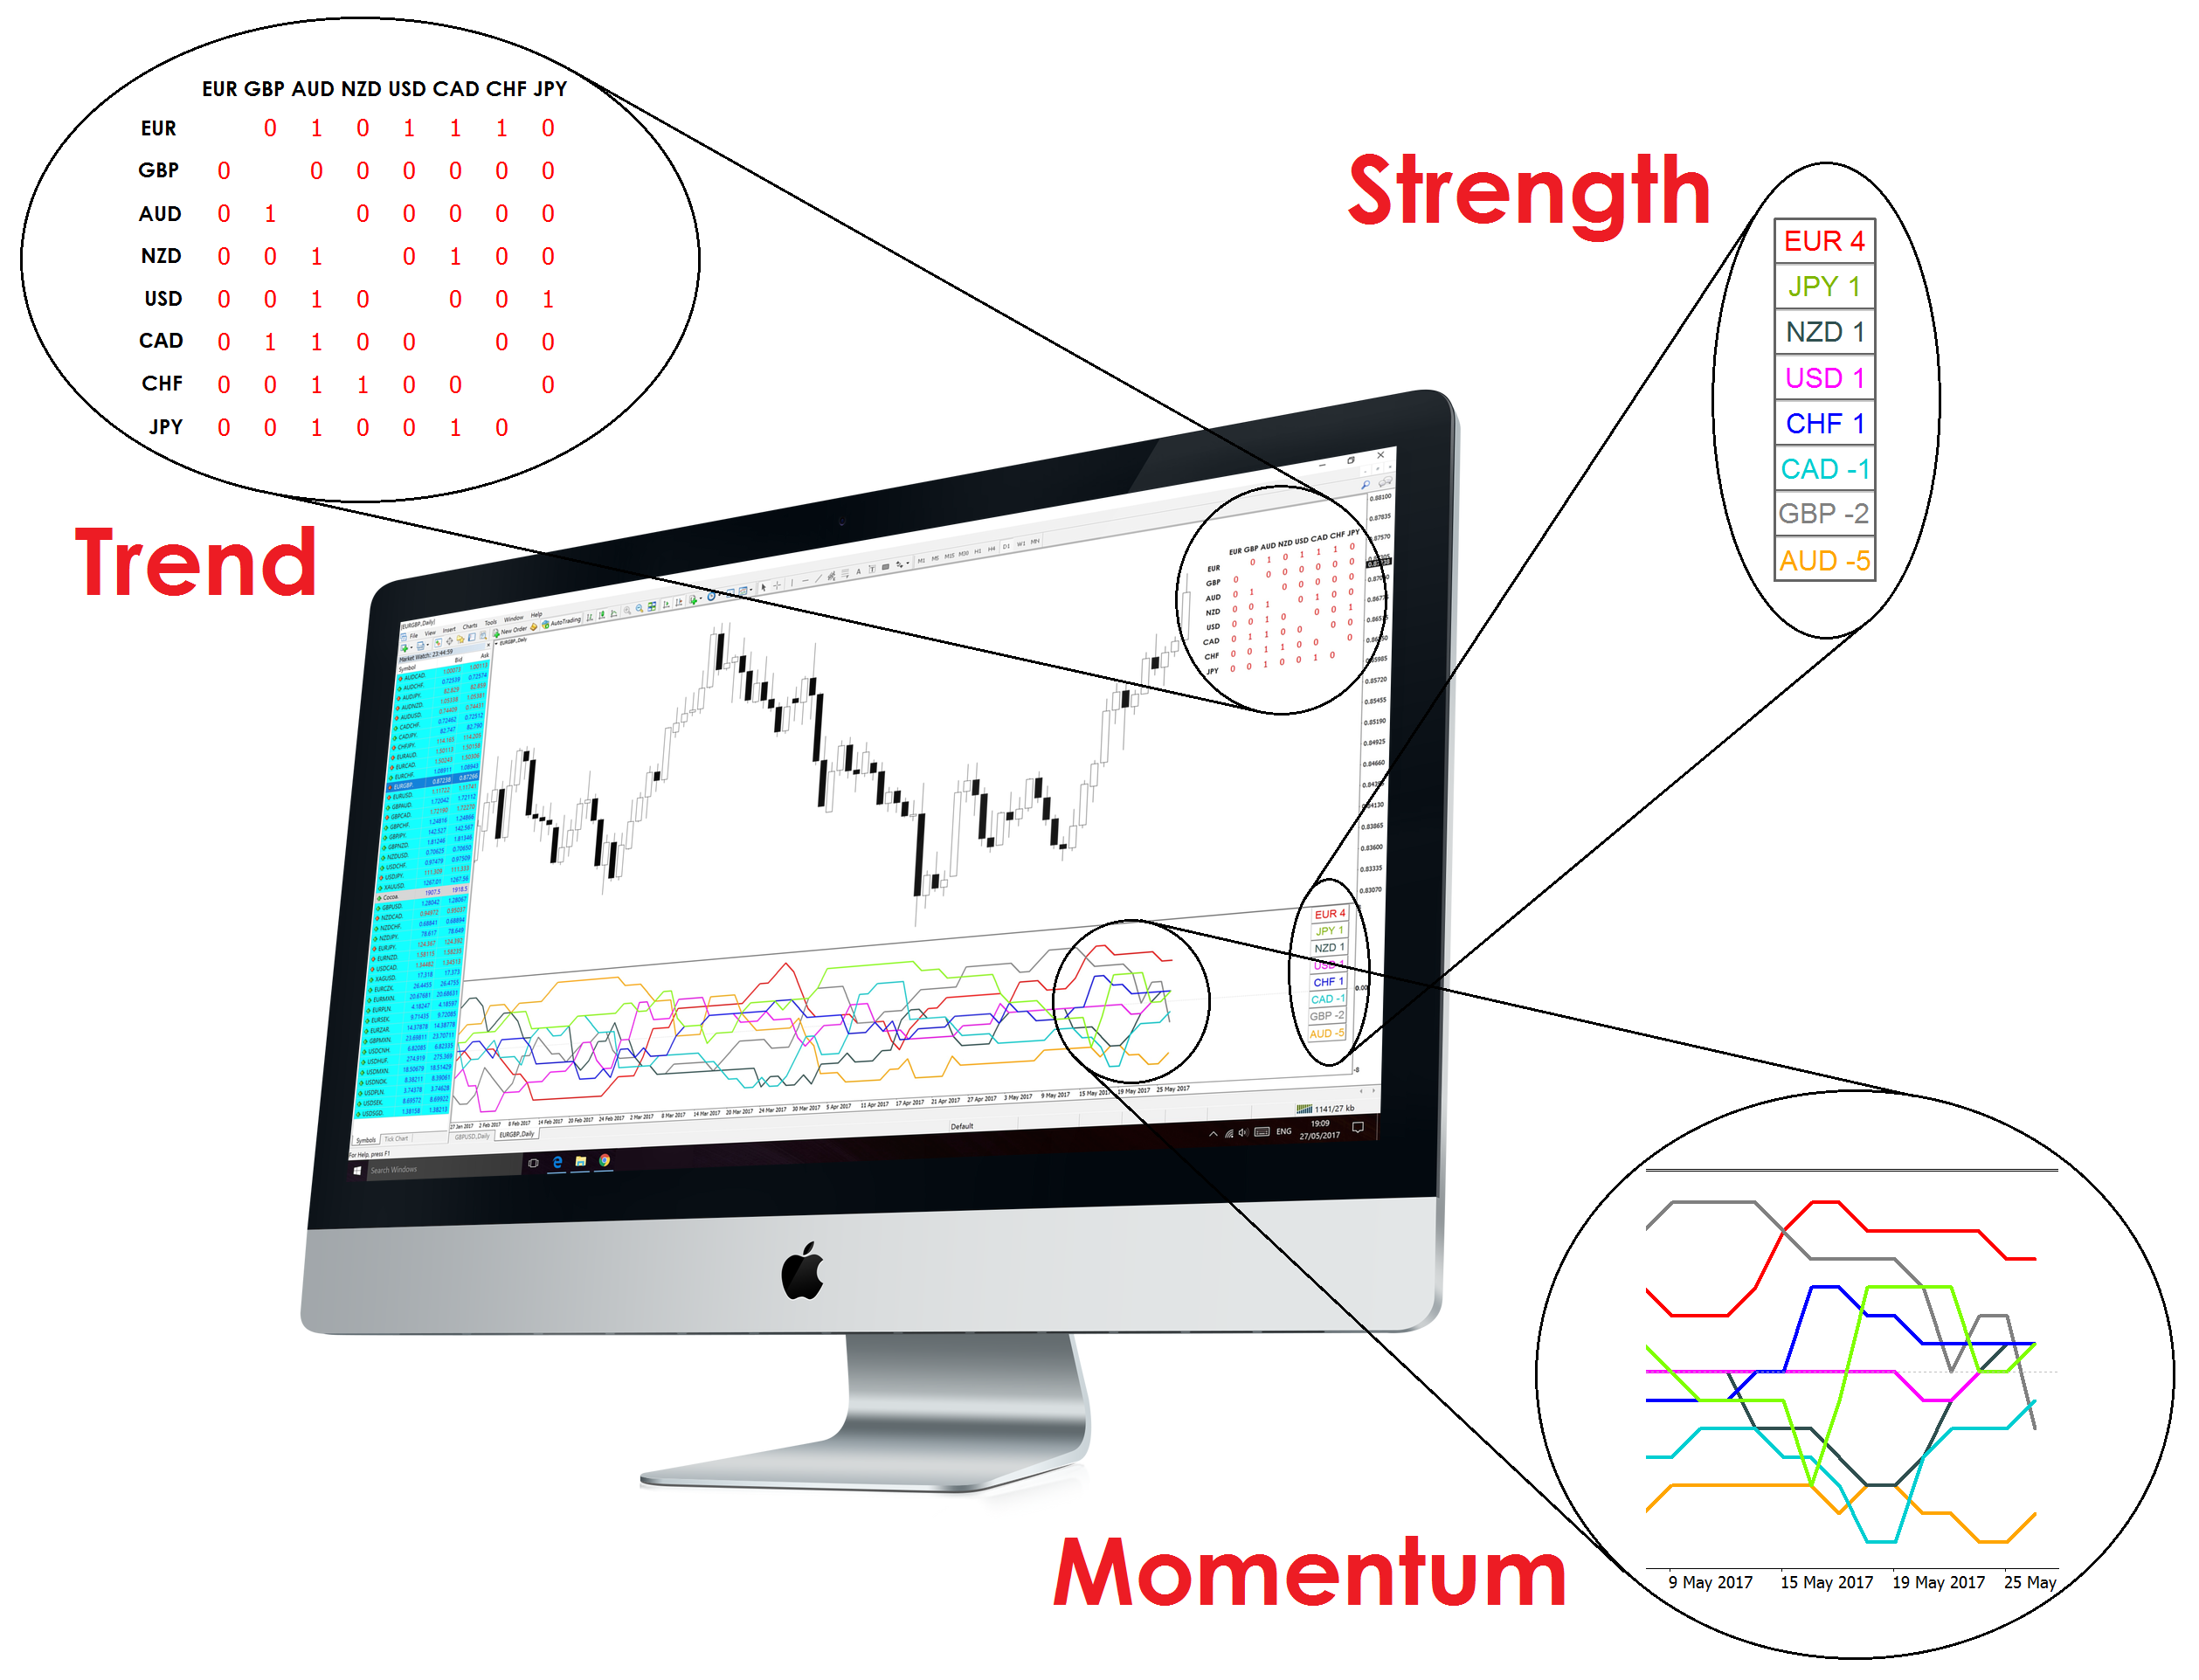 Trade forex trends, strength and momentum using Currency Strength Matrix indicator available on Metatrader 4